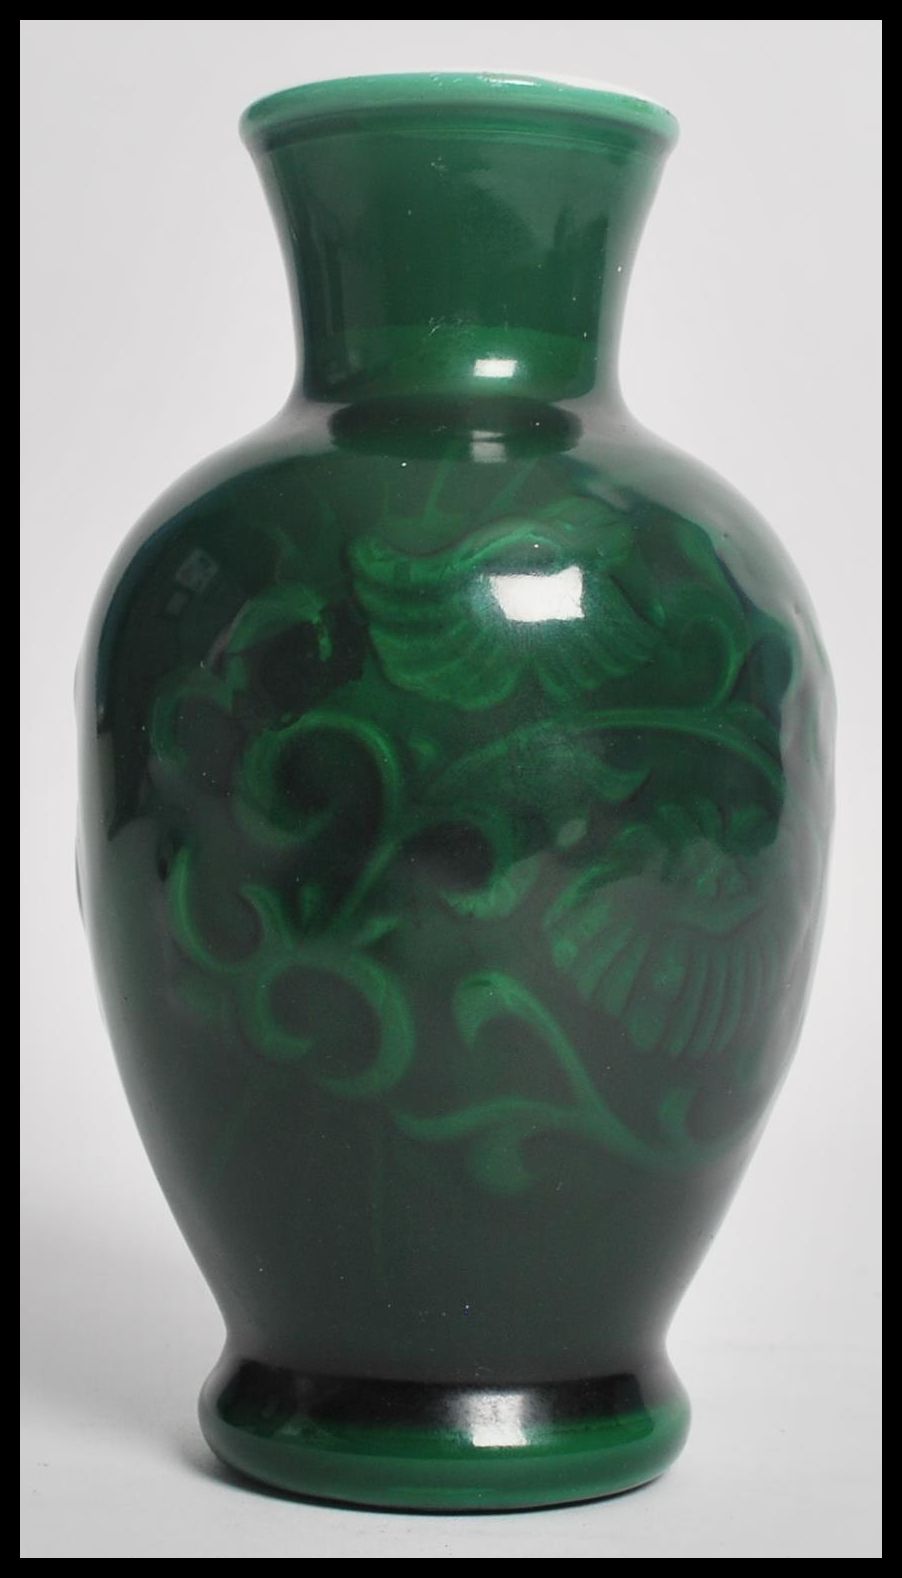 A Chinese cameo / Peking glass vase, 19th/20th century, of ovoid form. The opalescent white glass